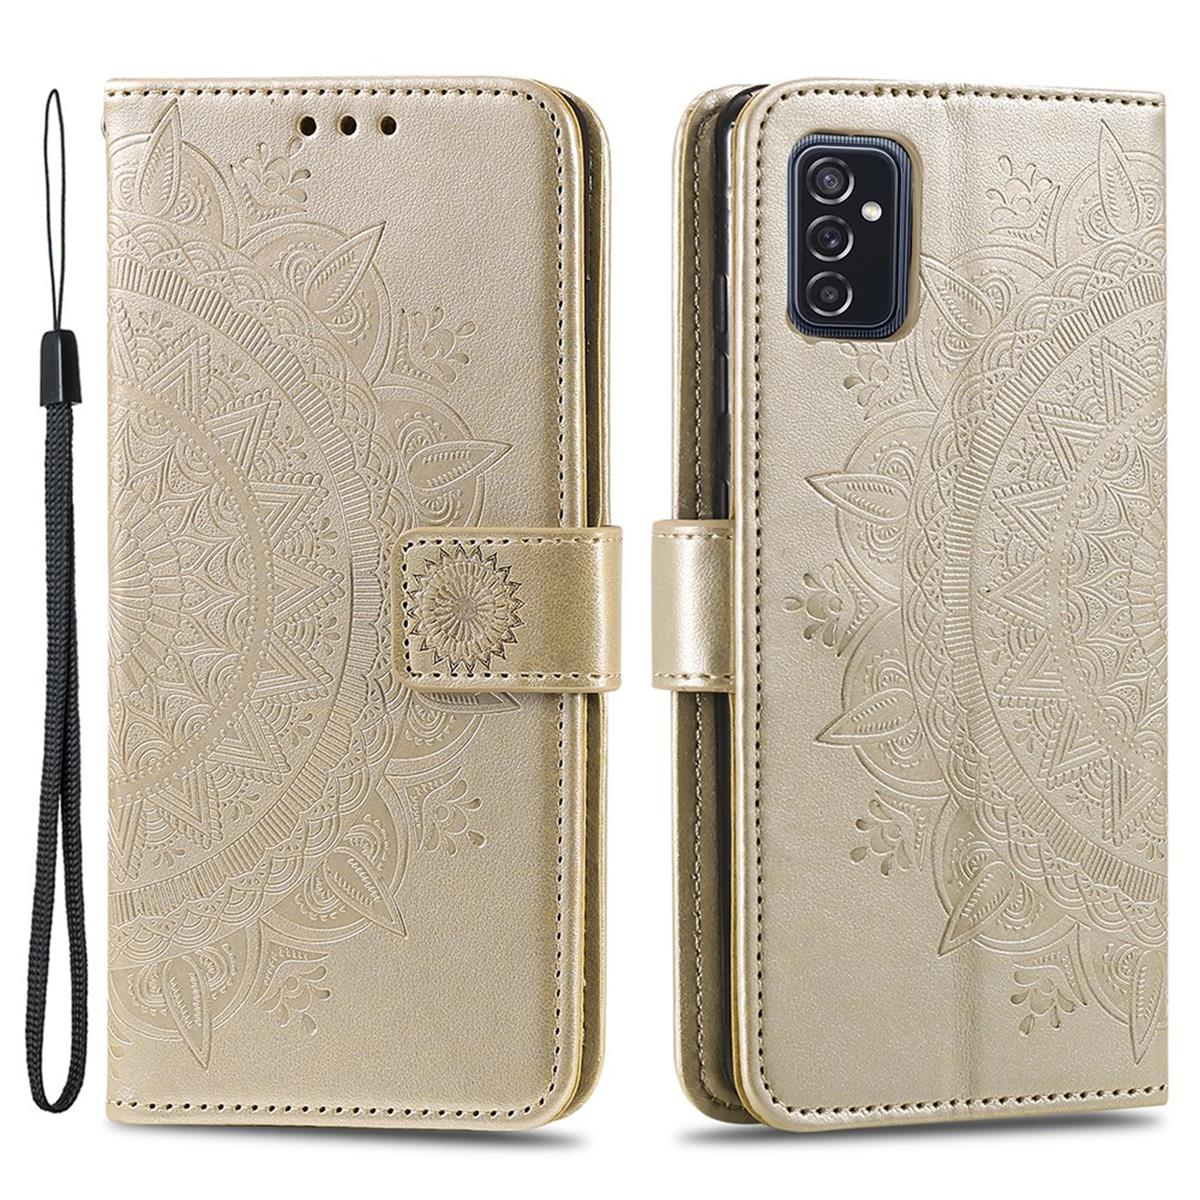 COVERKINGZ Mandala 5G, Galaxy mit Muster, Klapphülle Bookcover, Gold M52 Samsung,